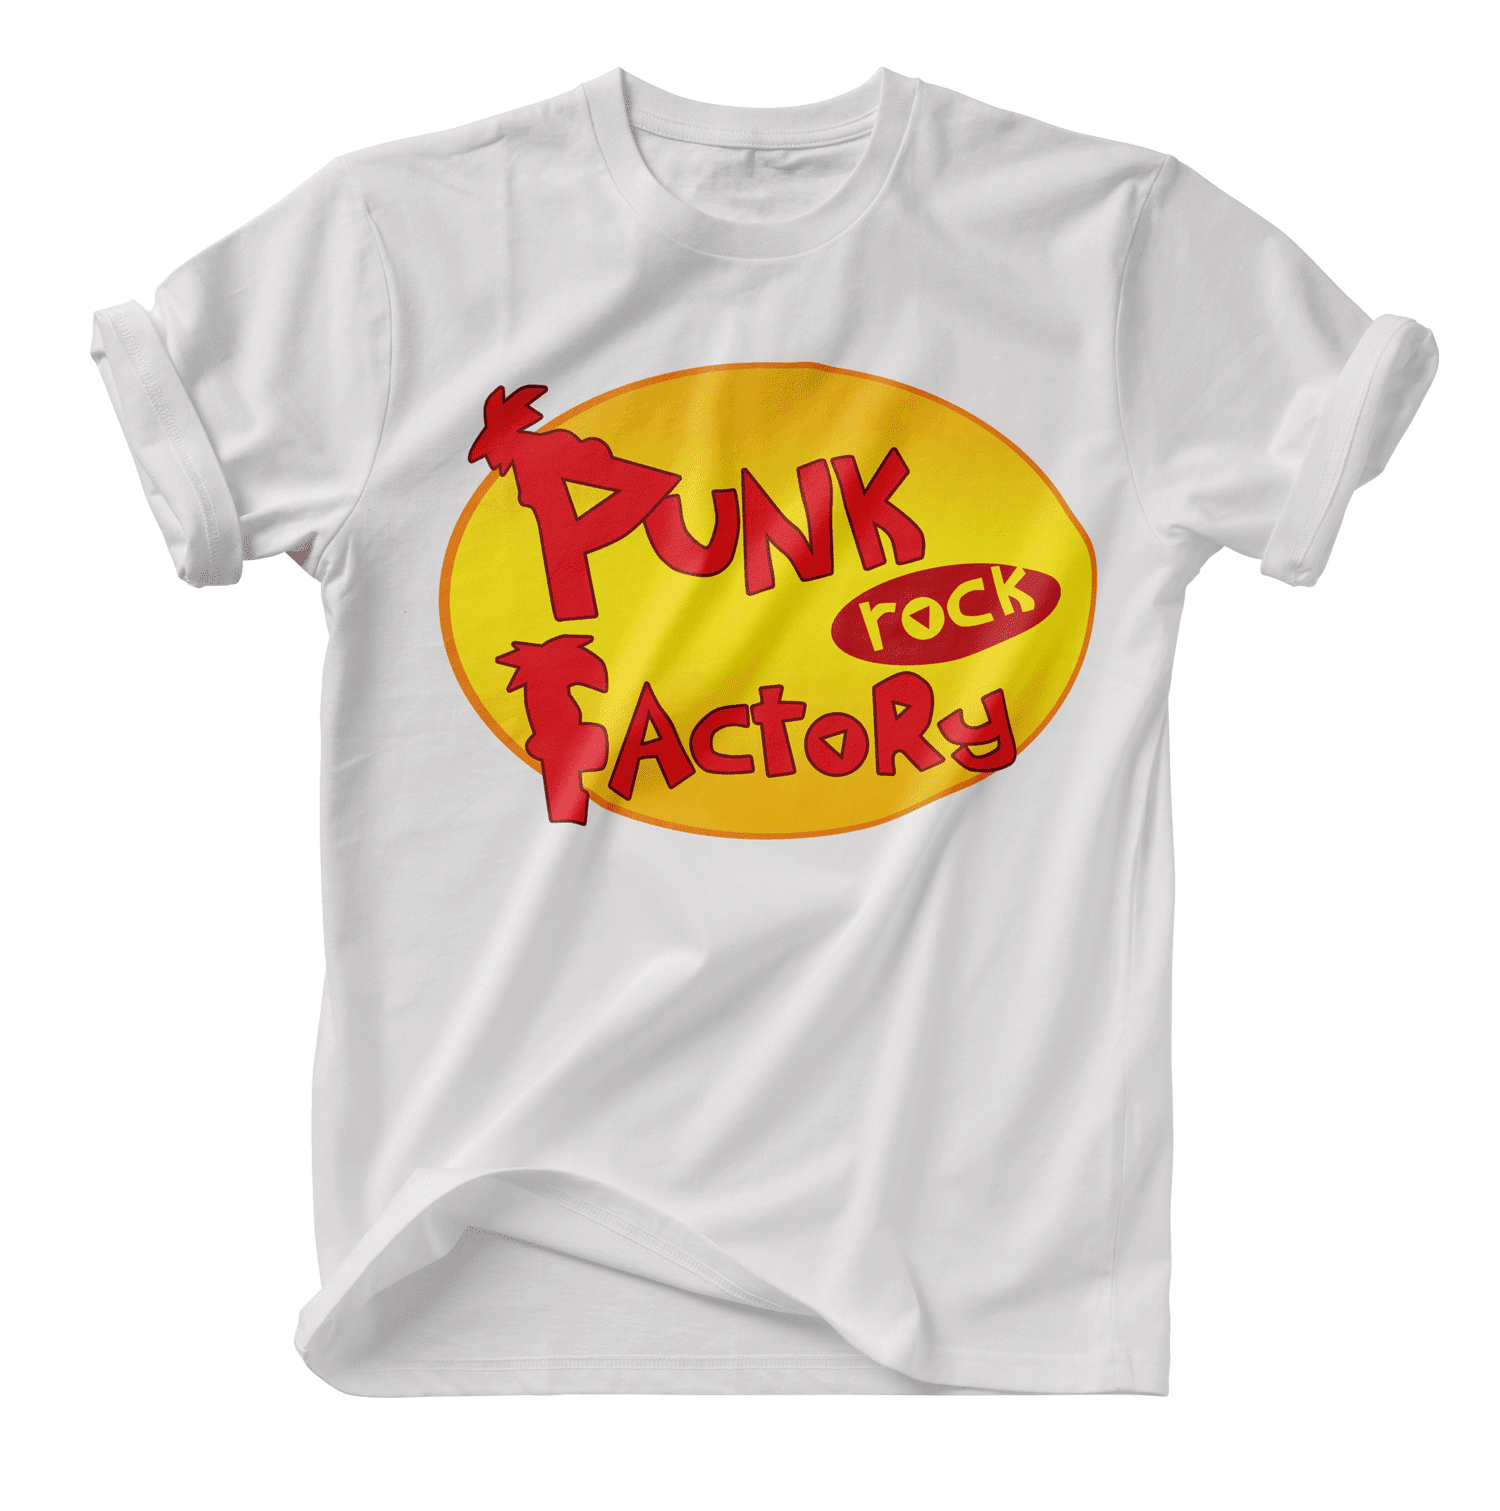 Phineas and Ferb Apparel Punk Rock Factory 